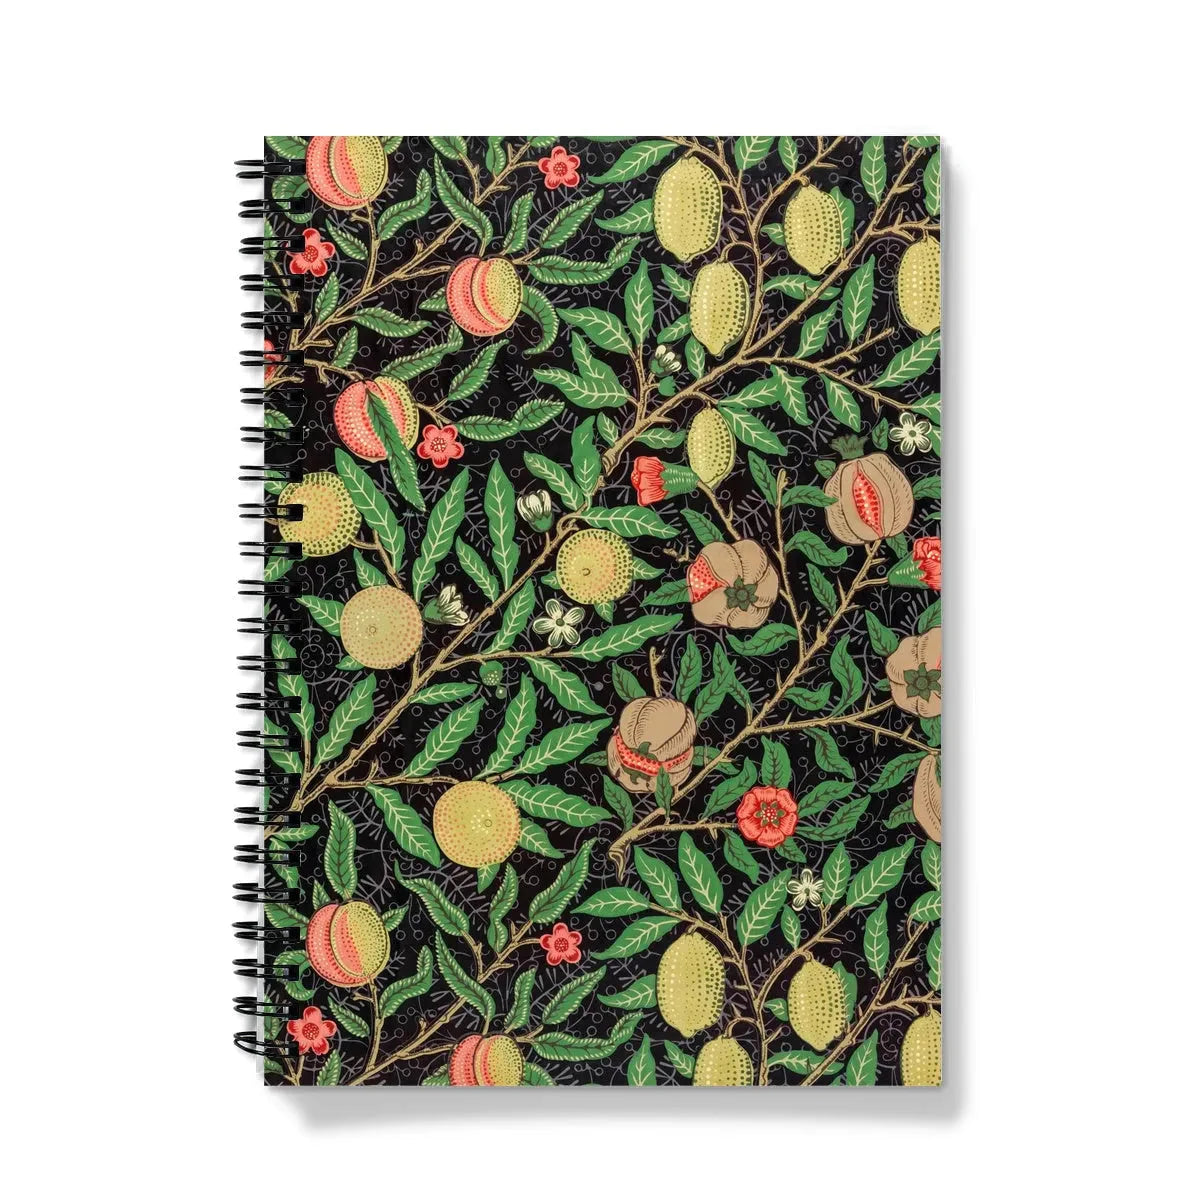 Four Fruits Too By William Morris Notebook - A5 - Graph Paper - Notebooks & Notepads - Aesthetic Art